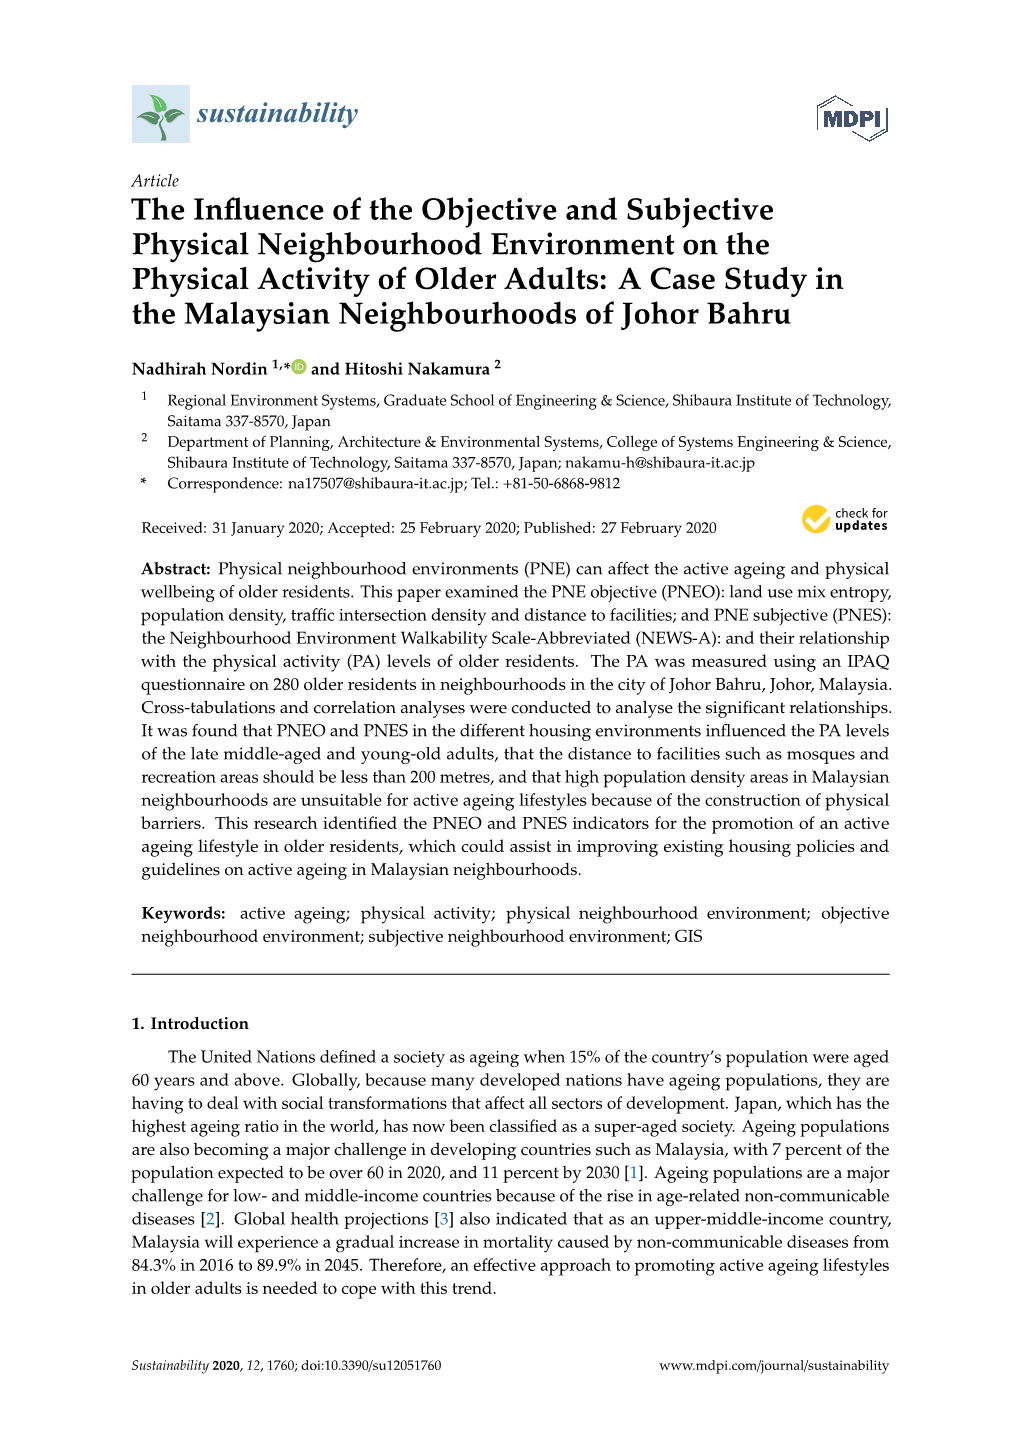 The Influence of the Objective and Subjective Physical Neighbourhood Environment on the Physical Activity of Older Adults